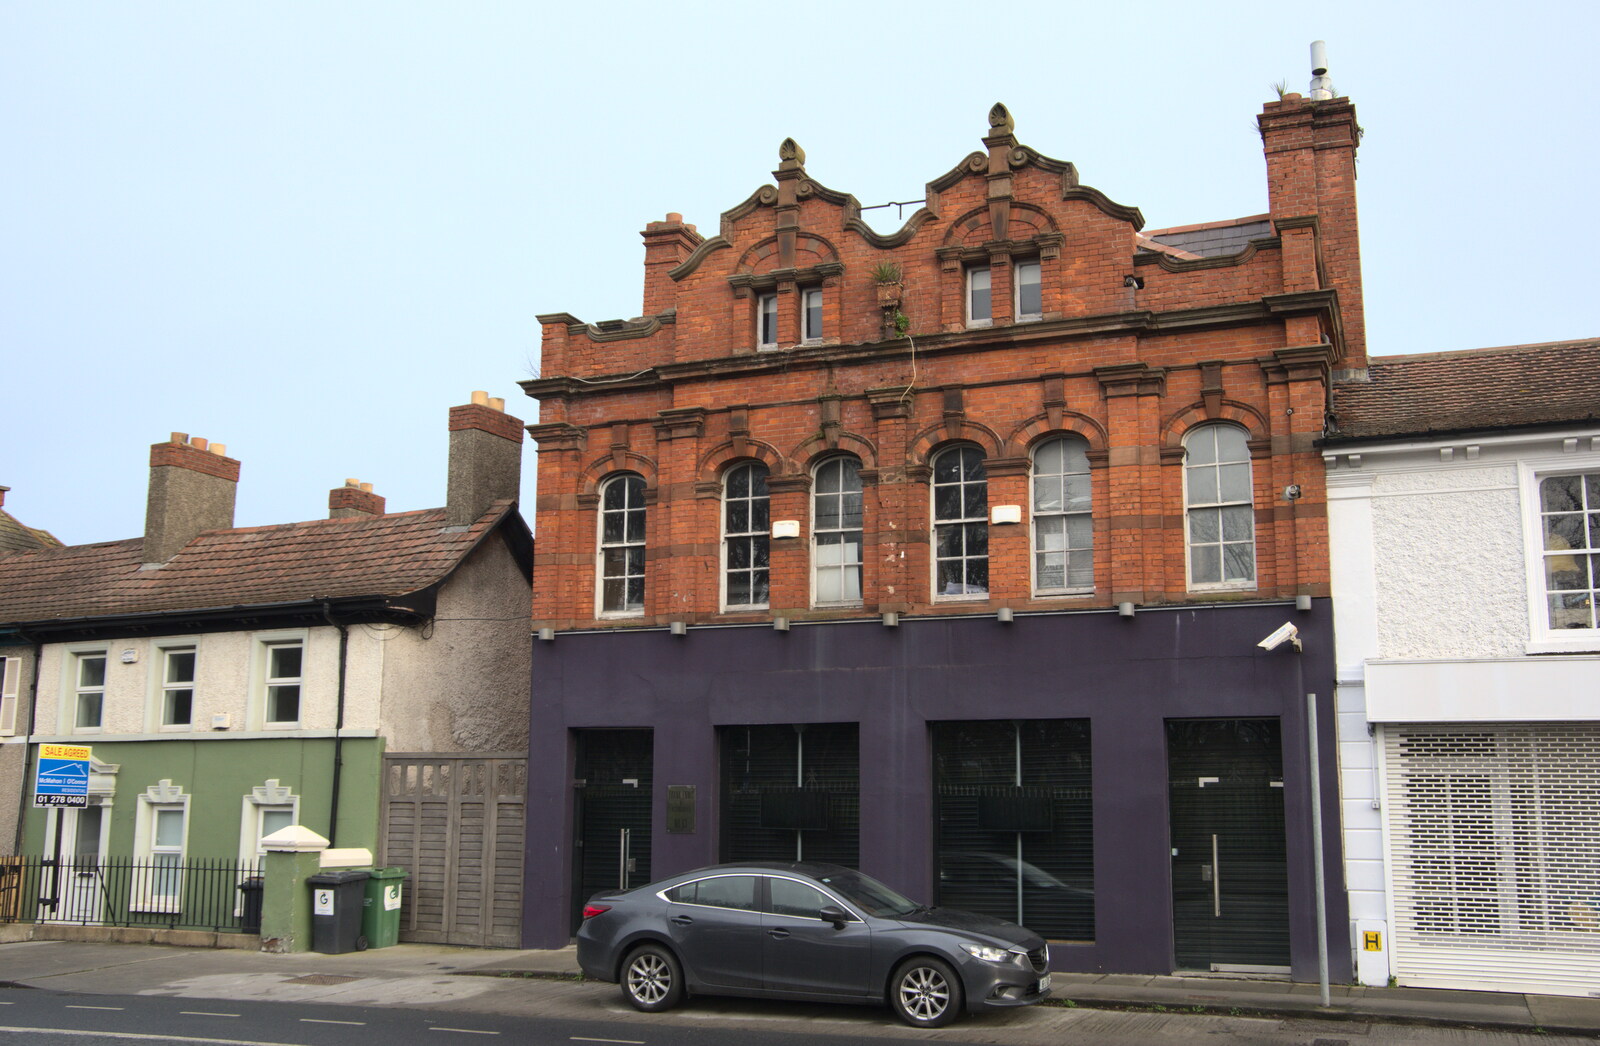 The End of the Breffni, Blackrock, Dublin - 18th February 2023: Another fancy building on Rock Road